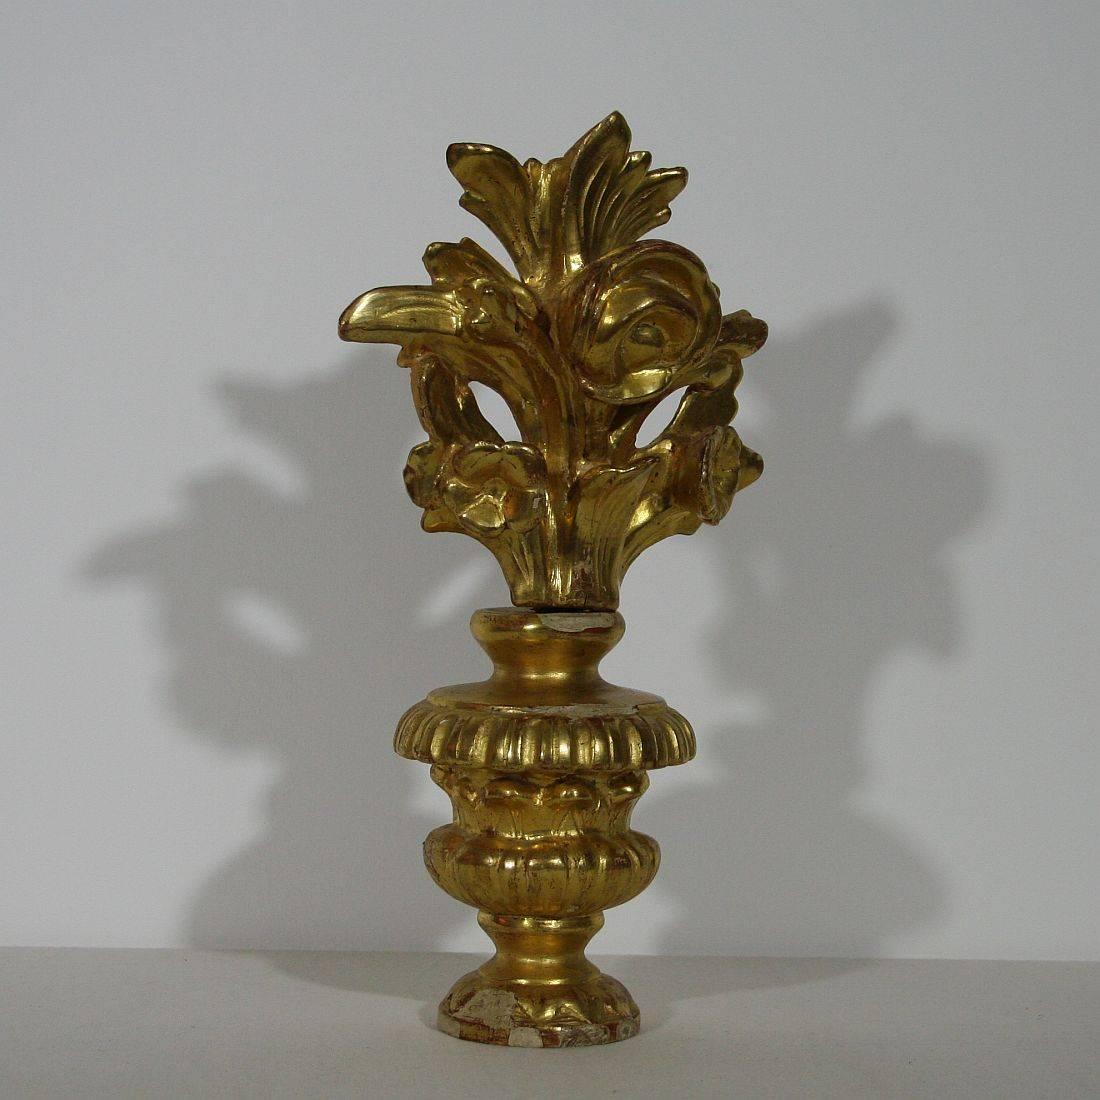 Carved 18th Century Italian Giltwood Baroque Ornament